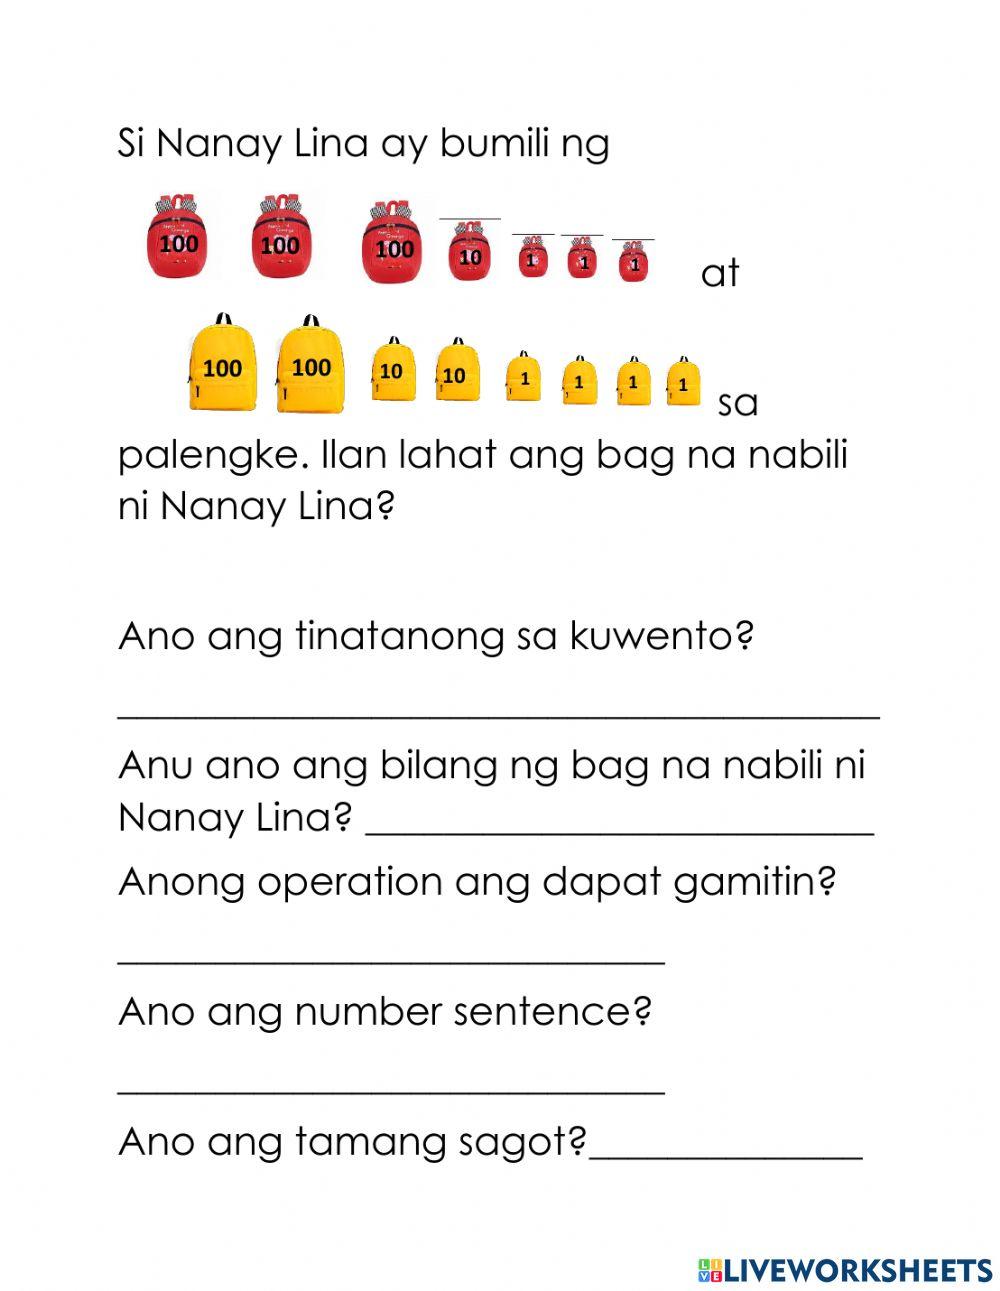 problem solving in math 3 tagalog